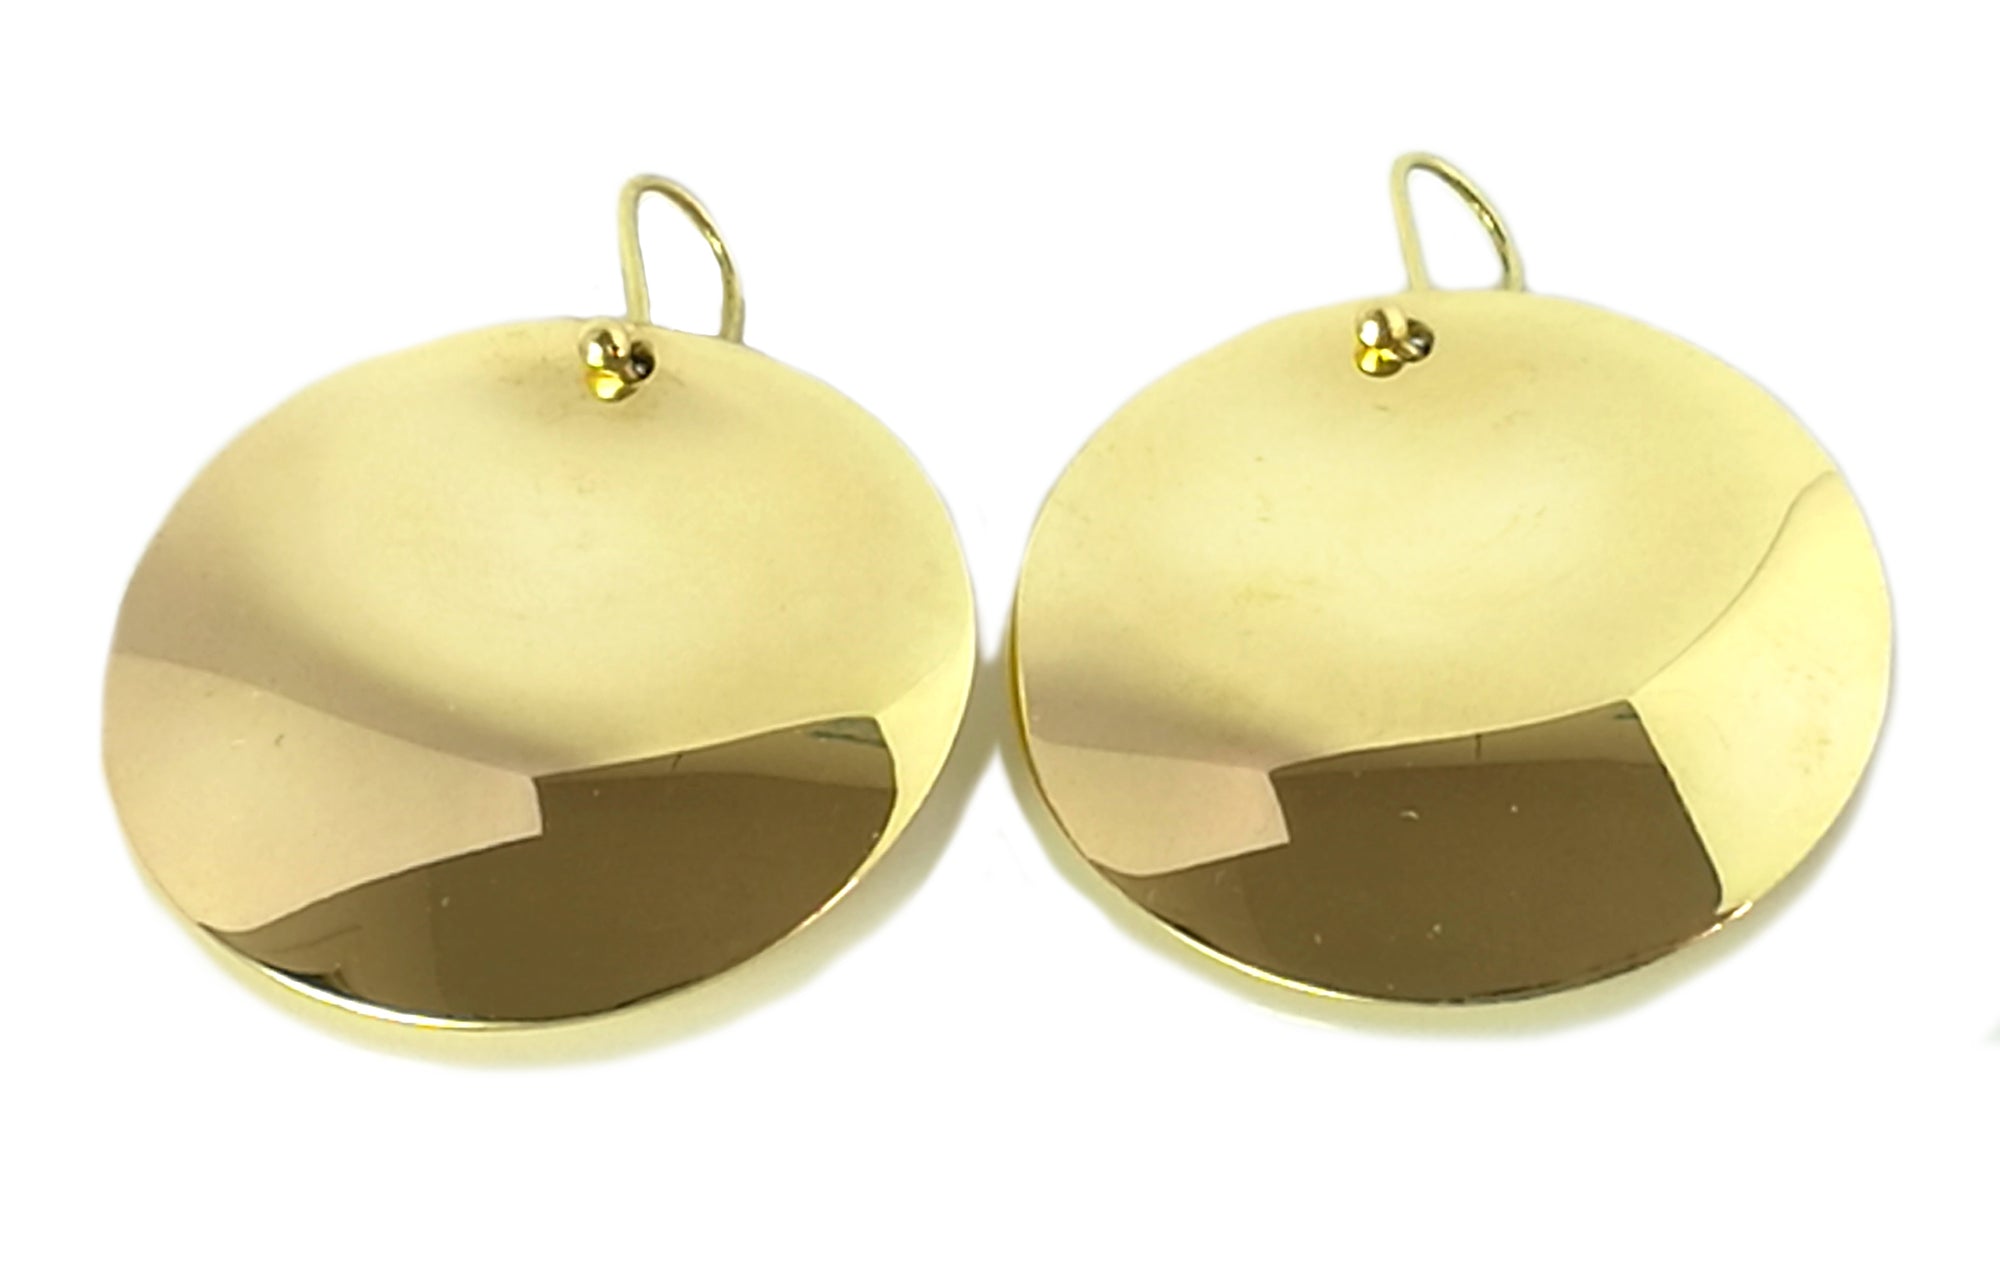 Tiffany & Co. Elsa Peretti Round Disc Earrings in 18k Yellow Gold, Large (30mm)